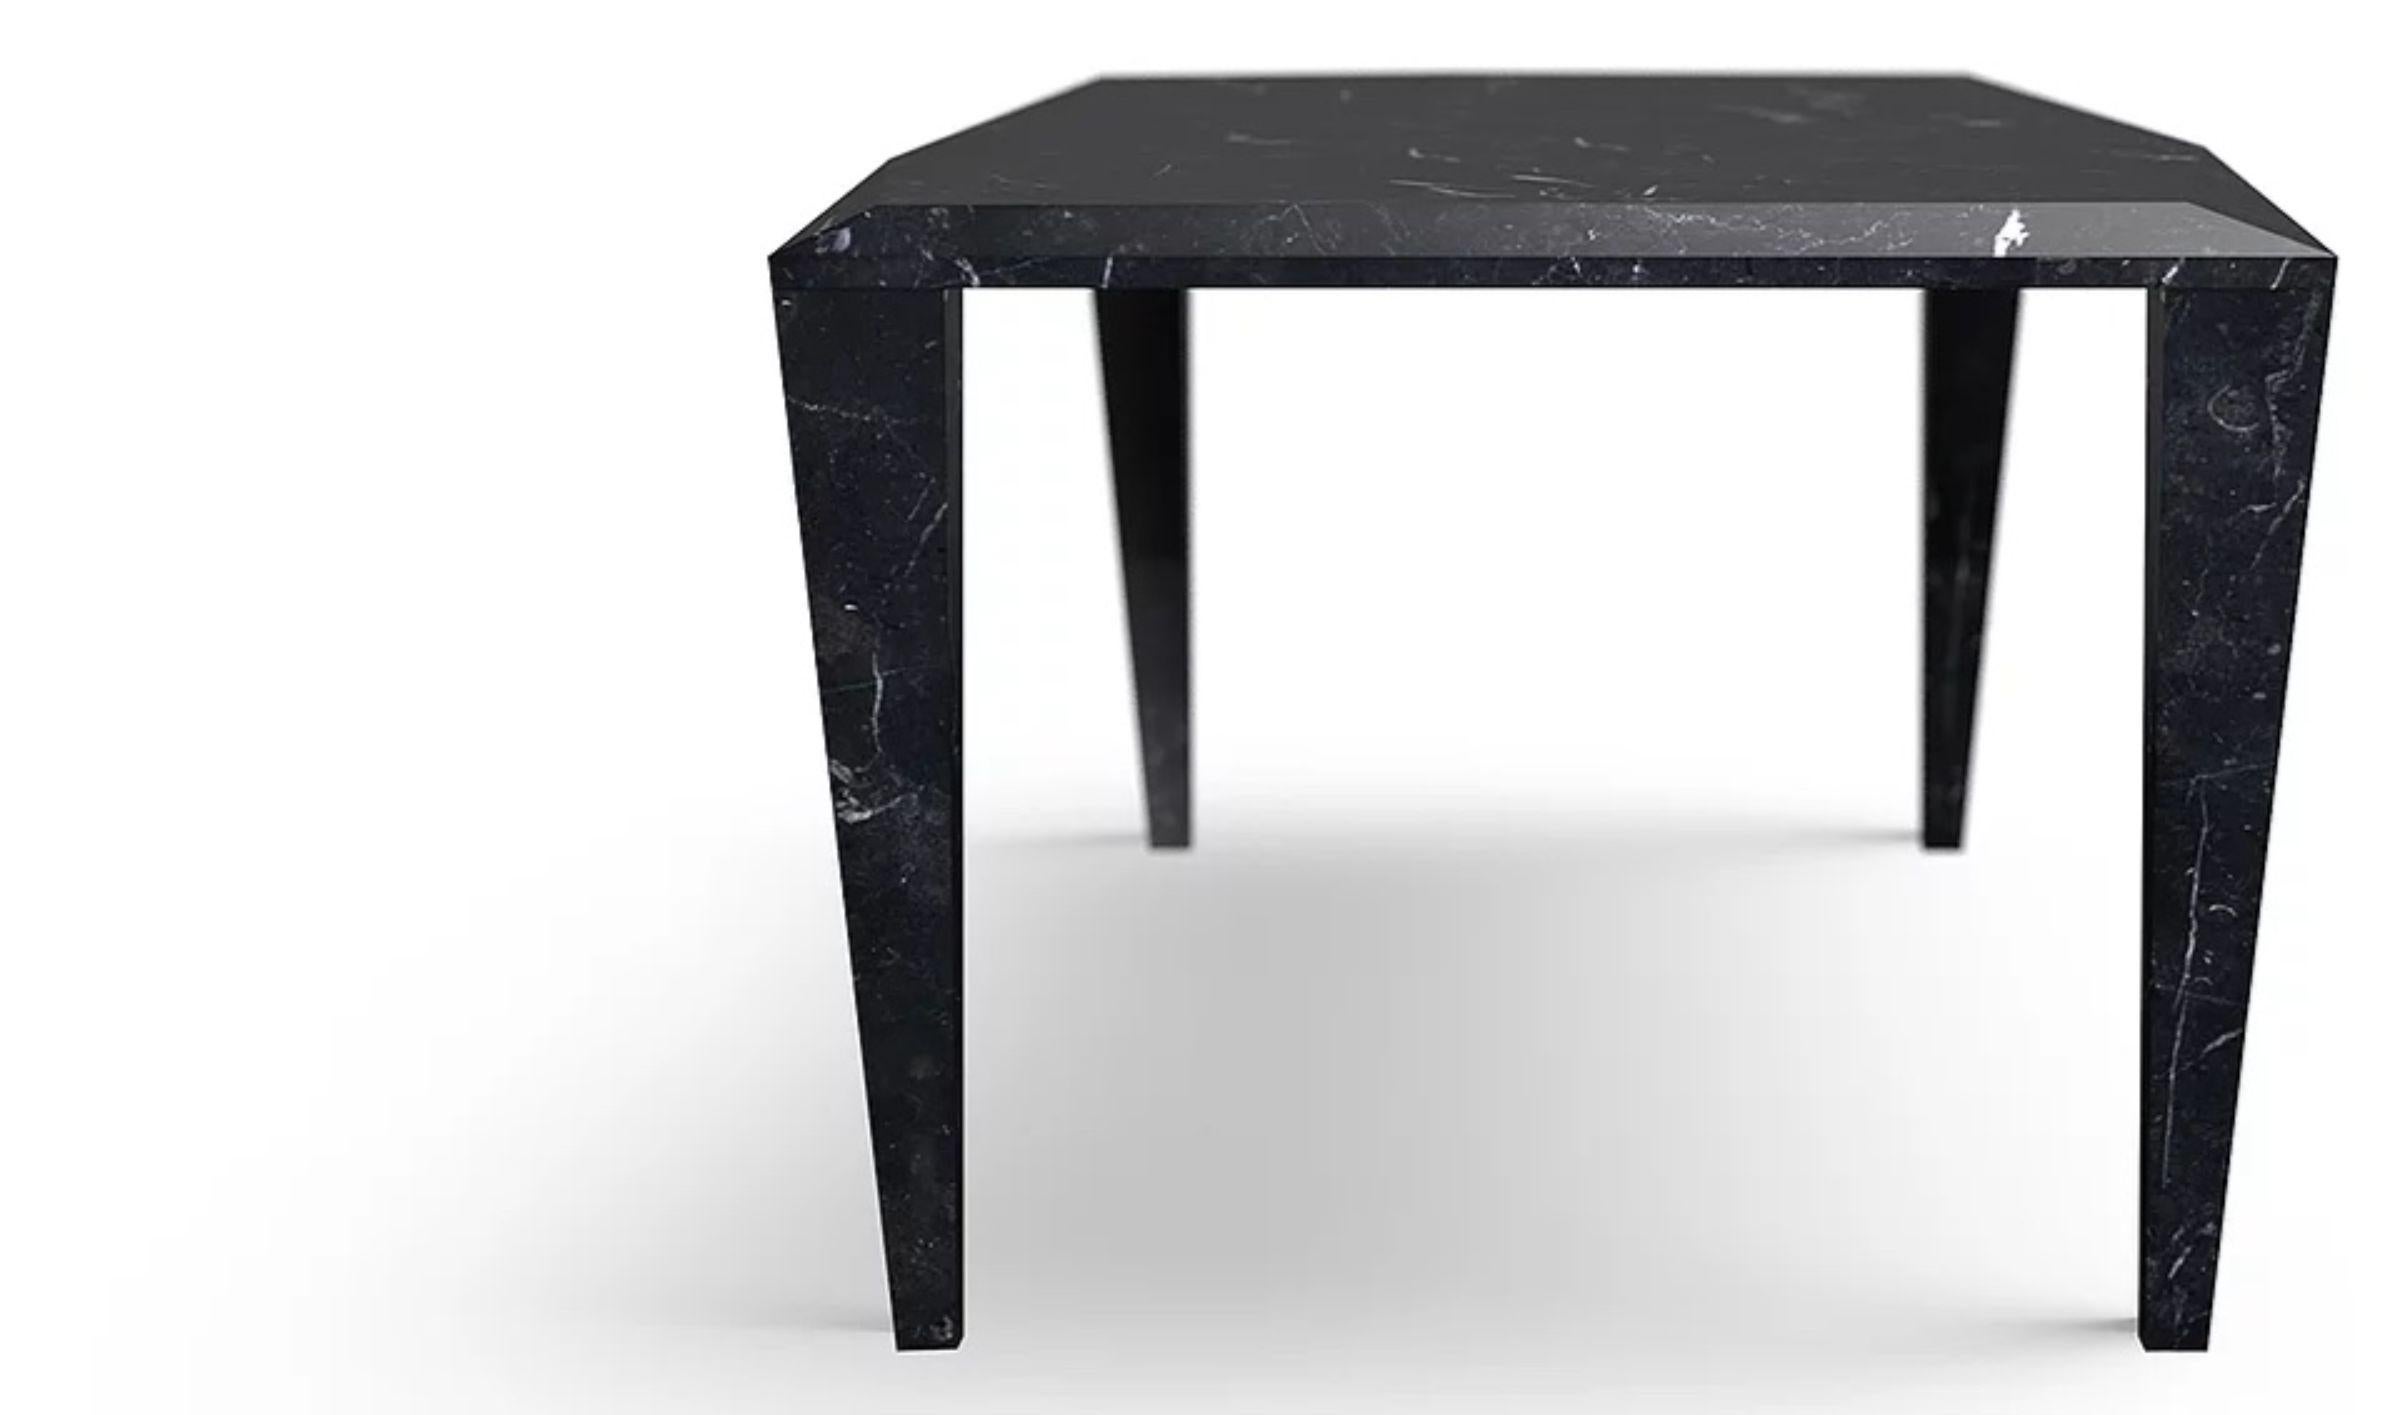 Prism marble table by Marmi Serafini
Materials: Marble 
Dimensions: D 100 x W 210 x H 75 cm.

Other marbles available.

Table characterized by oblique cuts able to perform and carry on the play of dark and light effects that making it modern,